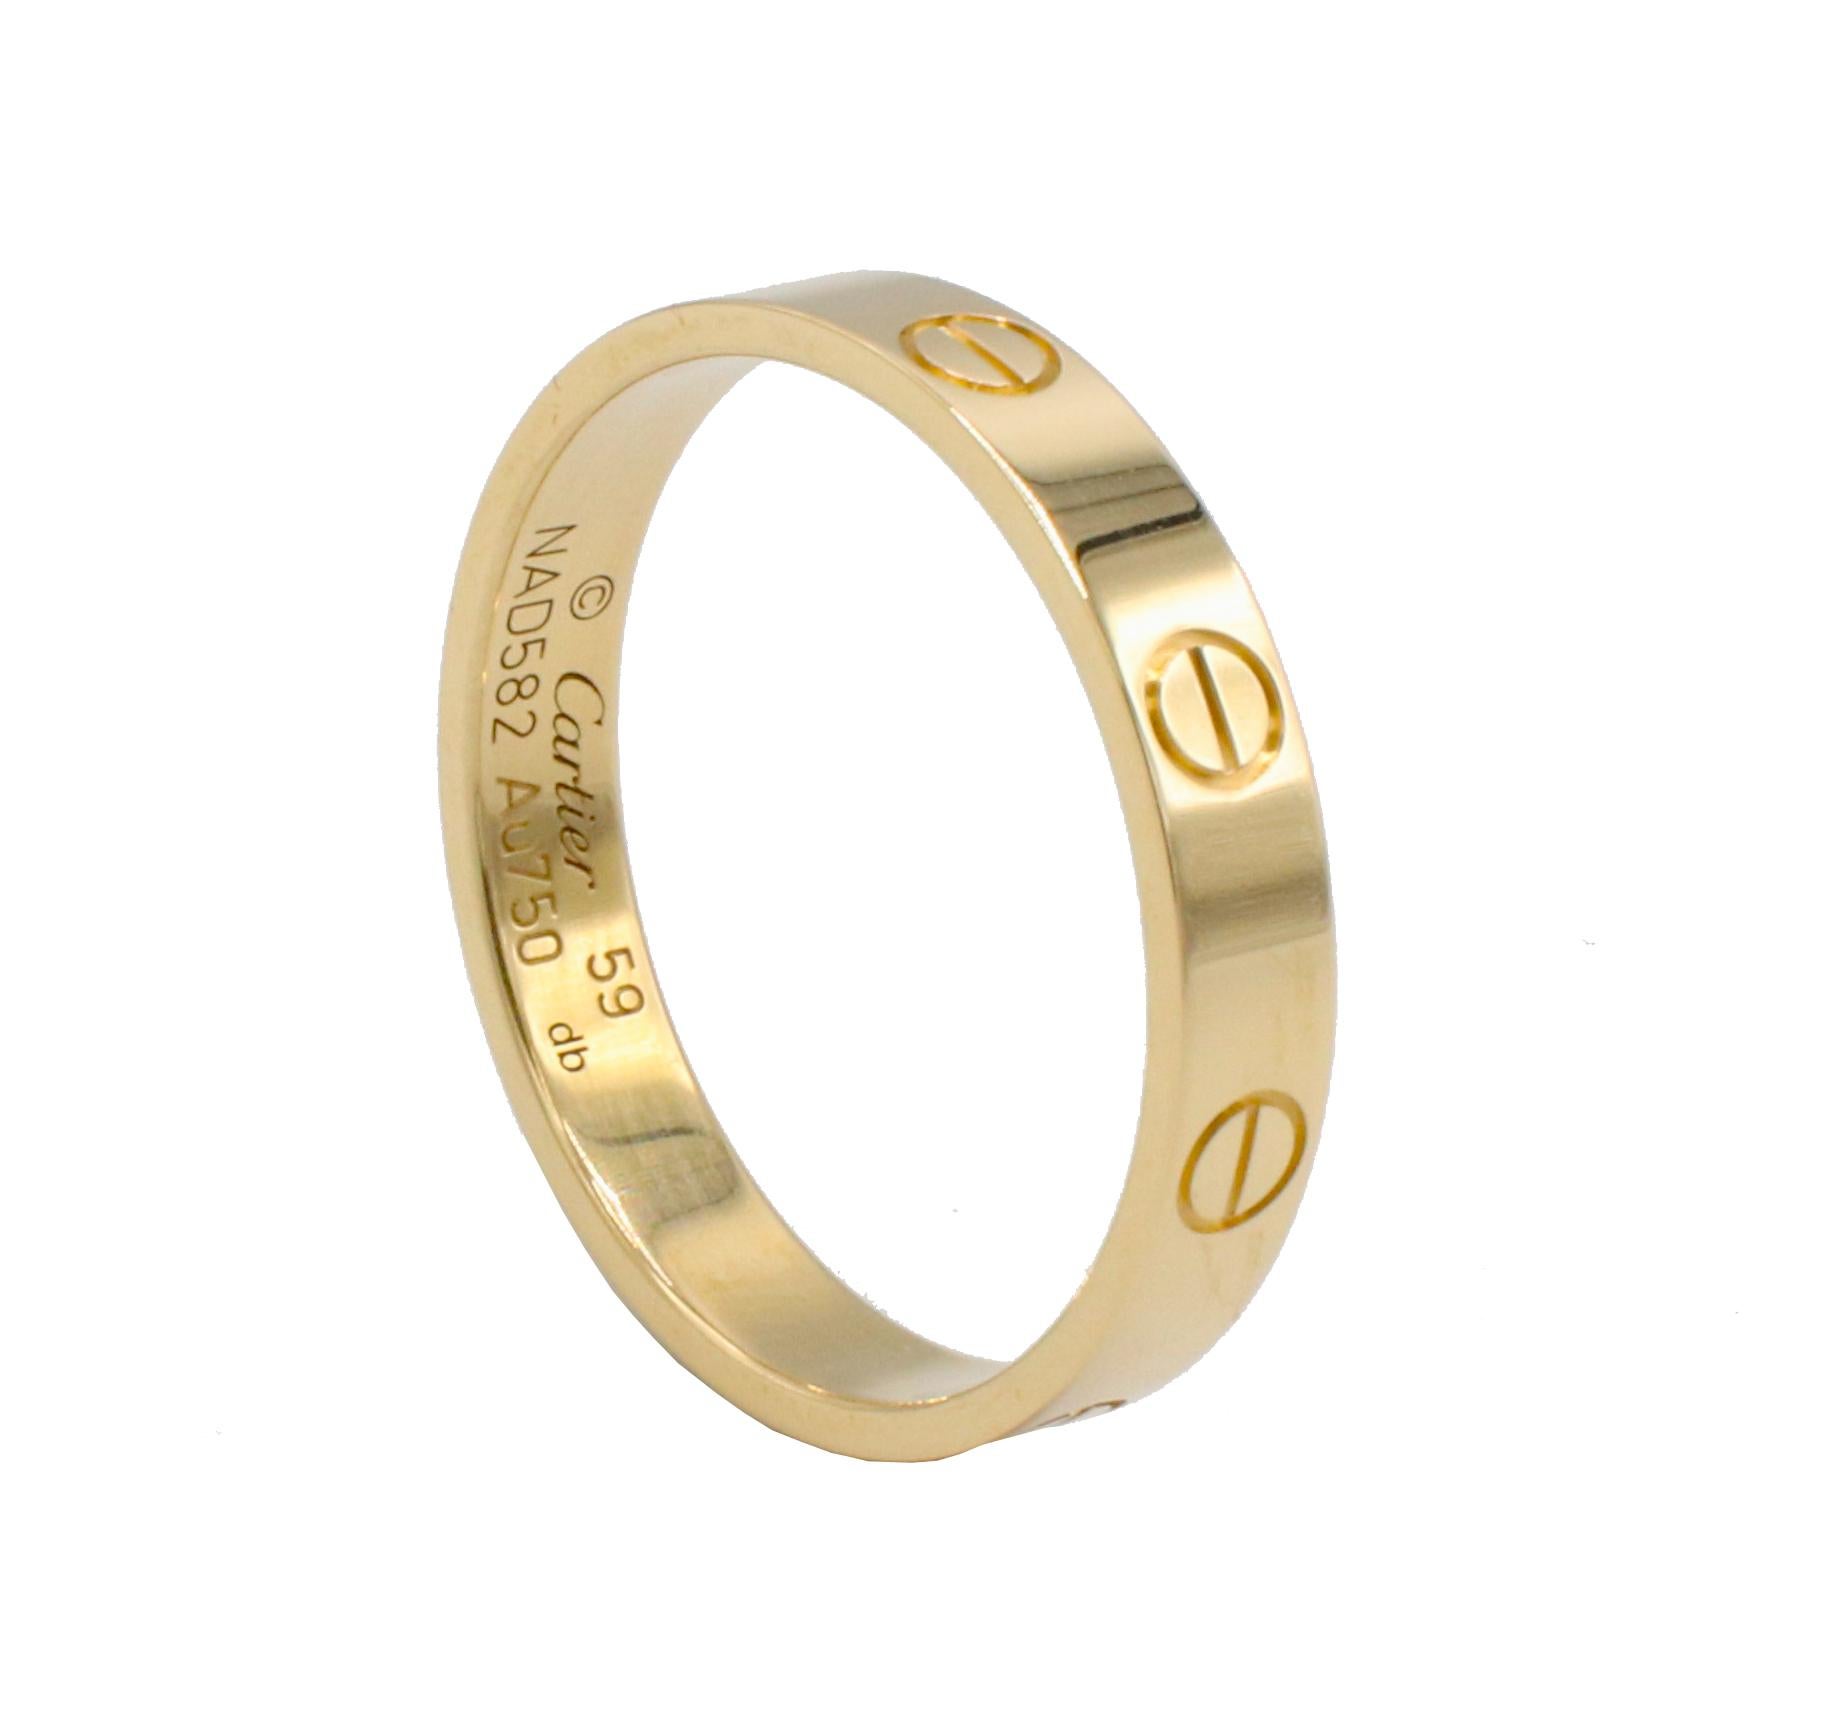 Cartier Love Yellow Gold Wedding Band Ring
Metal: 18k yellow gold
Weight: 3.72
Width: 3.6mm
Size: 59 (8.75 US)
Box & Papers
Retail: $1,170 USD